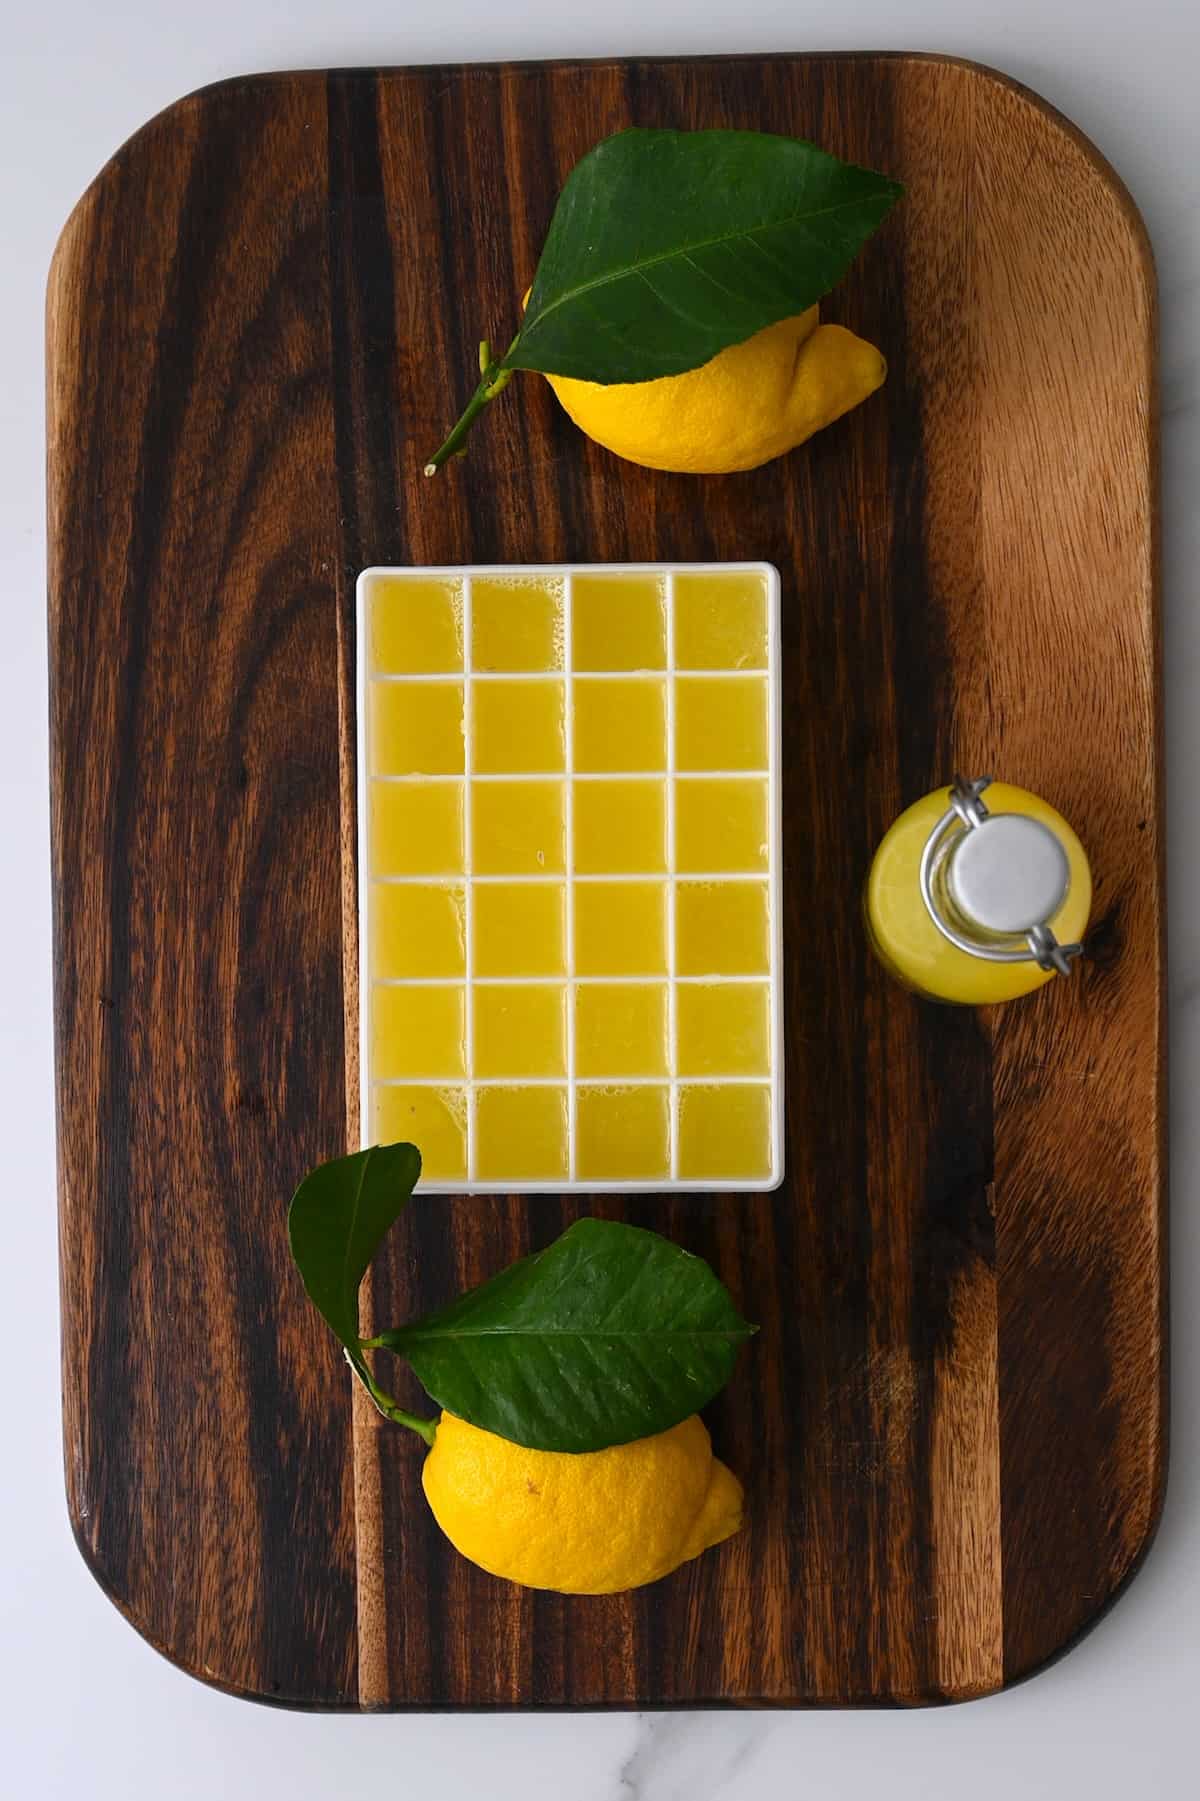 Two lemons a small bottle with lemon juice and an ice cube tray with lemon juice